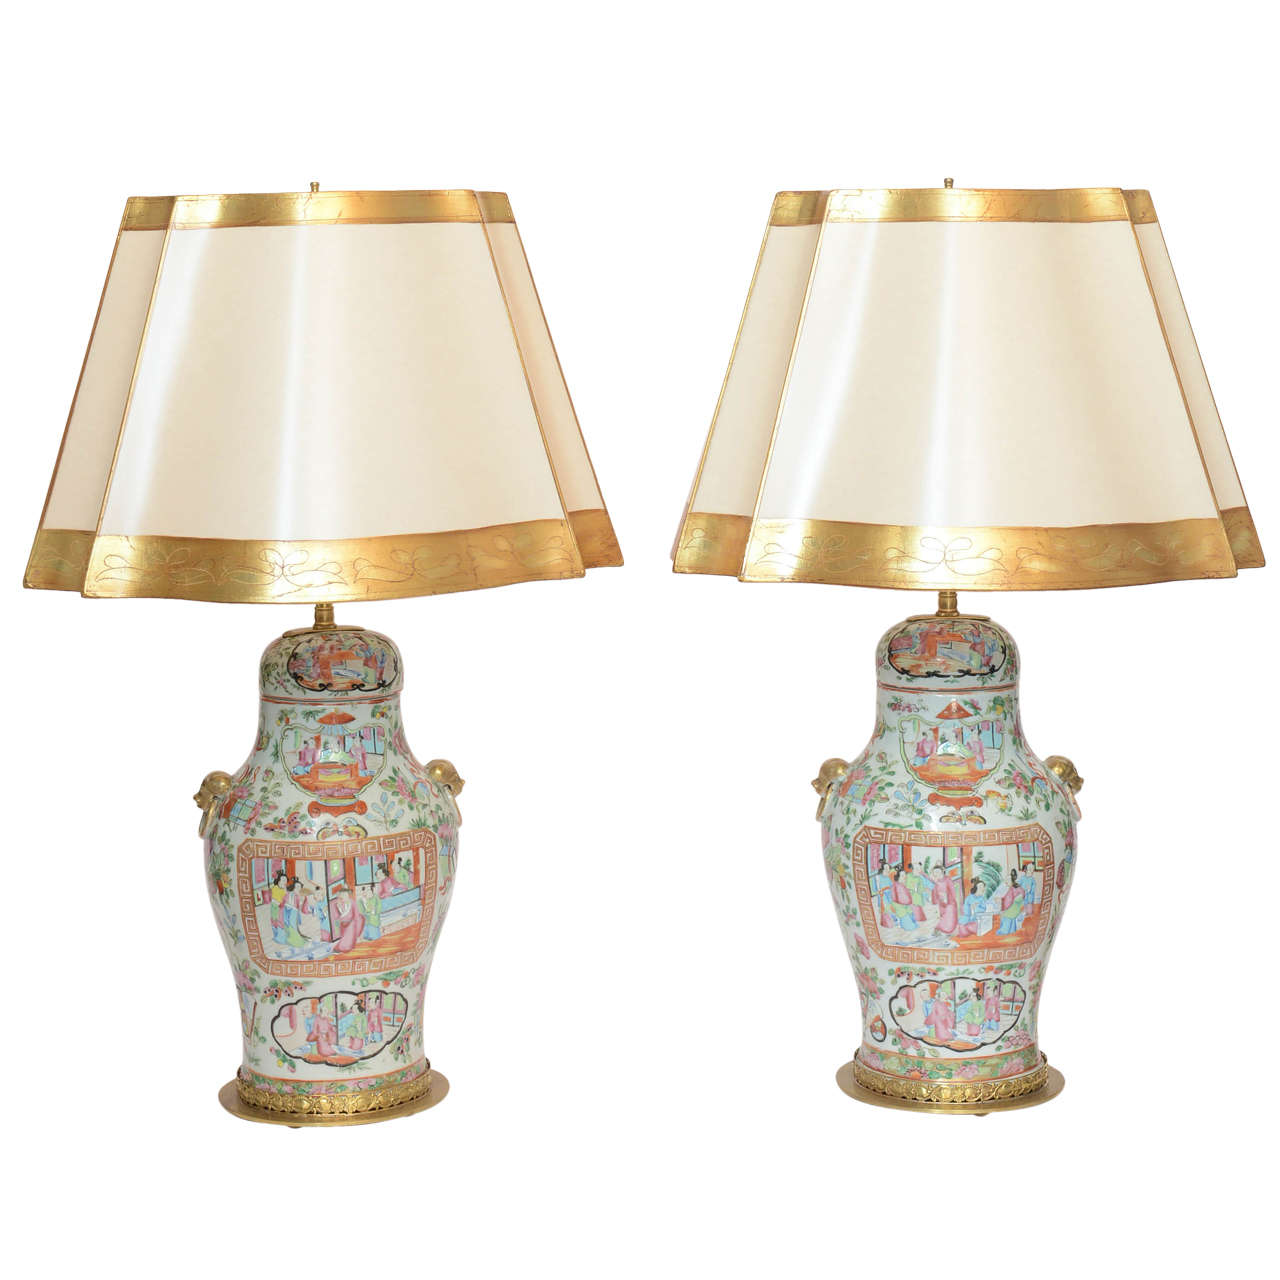 Pair of Chinese Rose Medallion Covered Jar Lamps For Sale